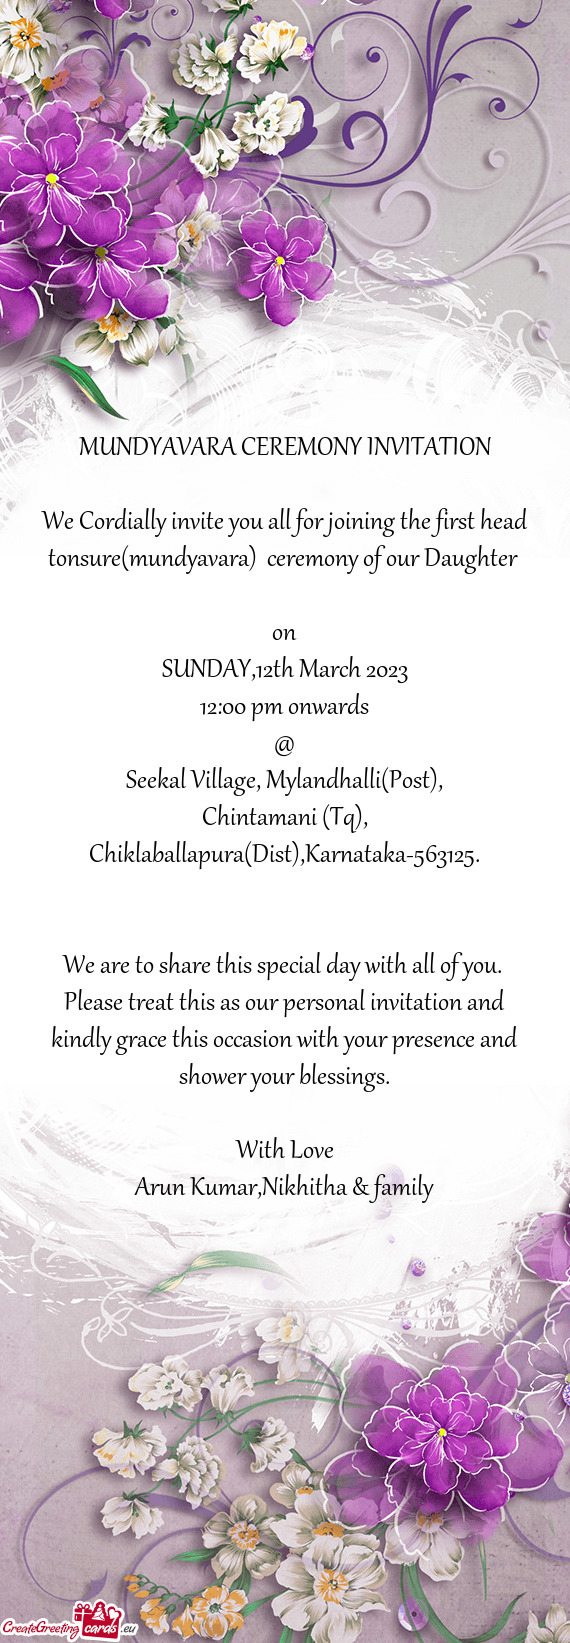 We Cordially invite you all for joining the first head tonsure(mundyavara) ceremony of our Daughter